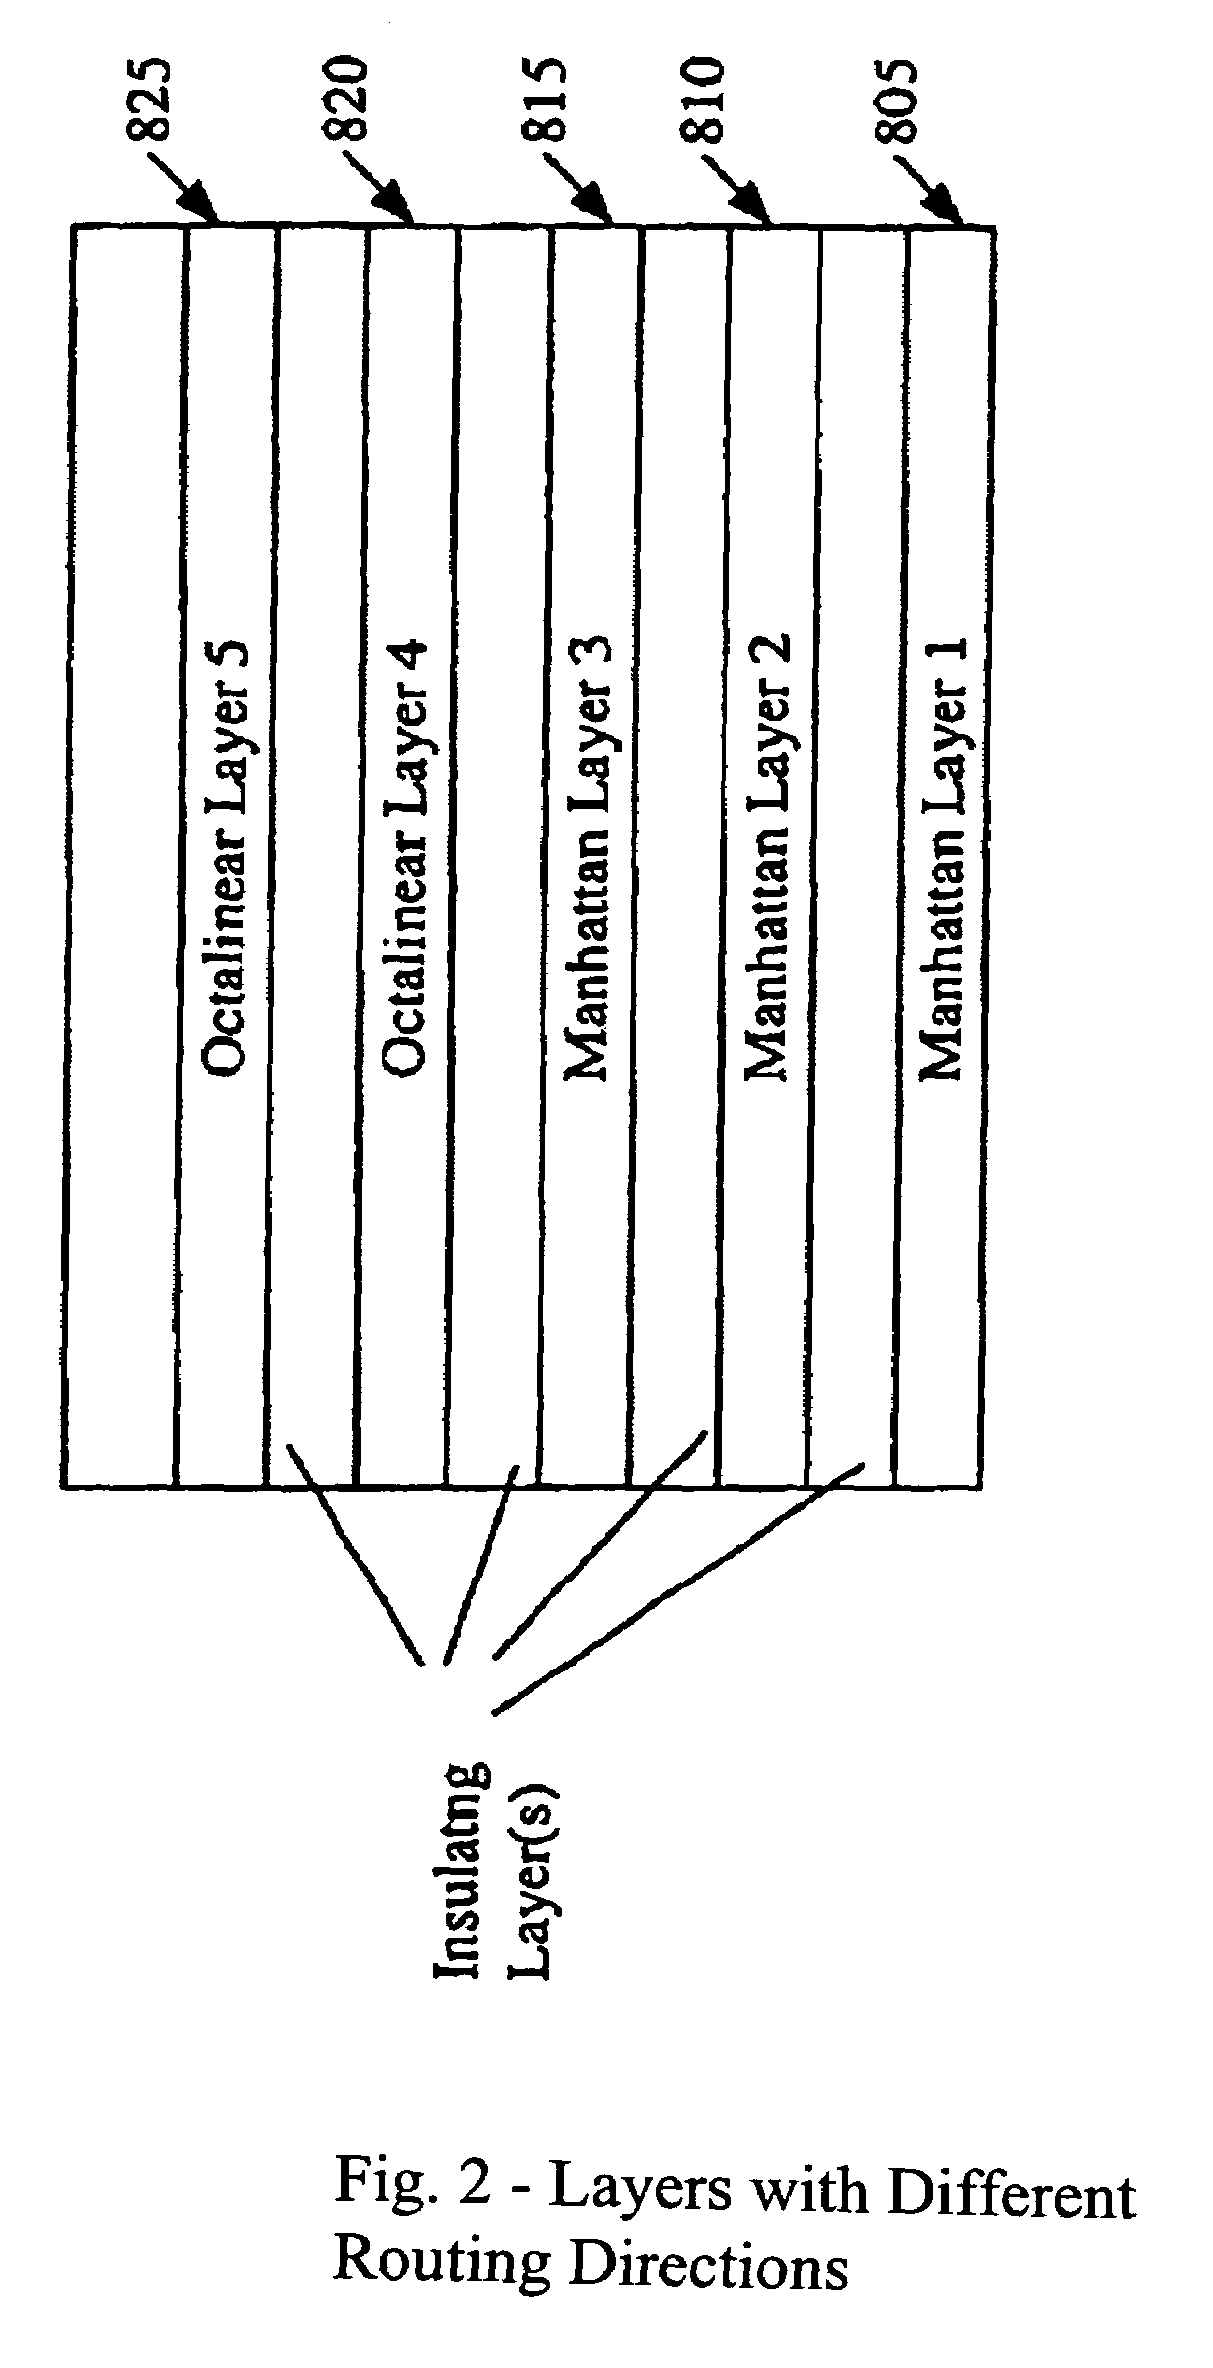 Method and system for implementing an analytical wirelength formulation